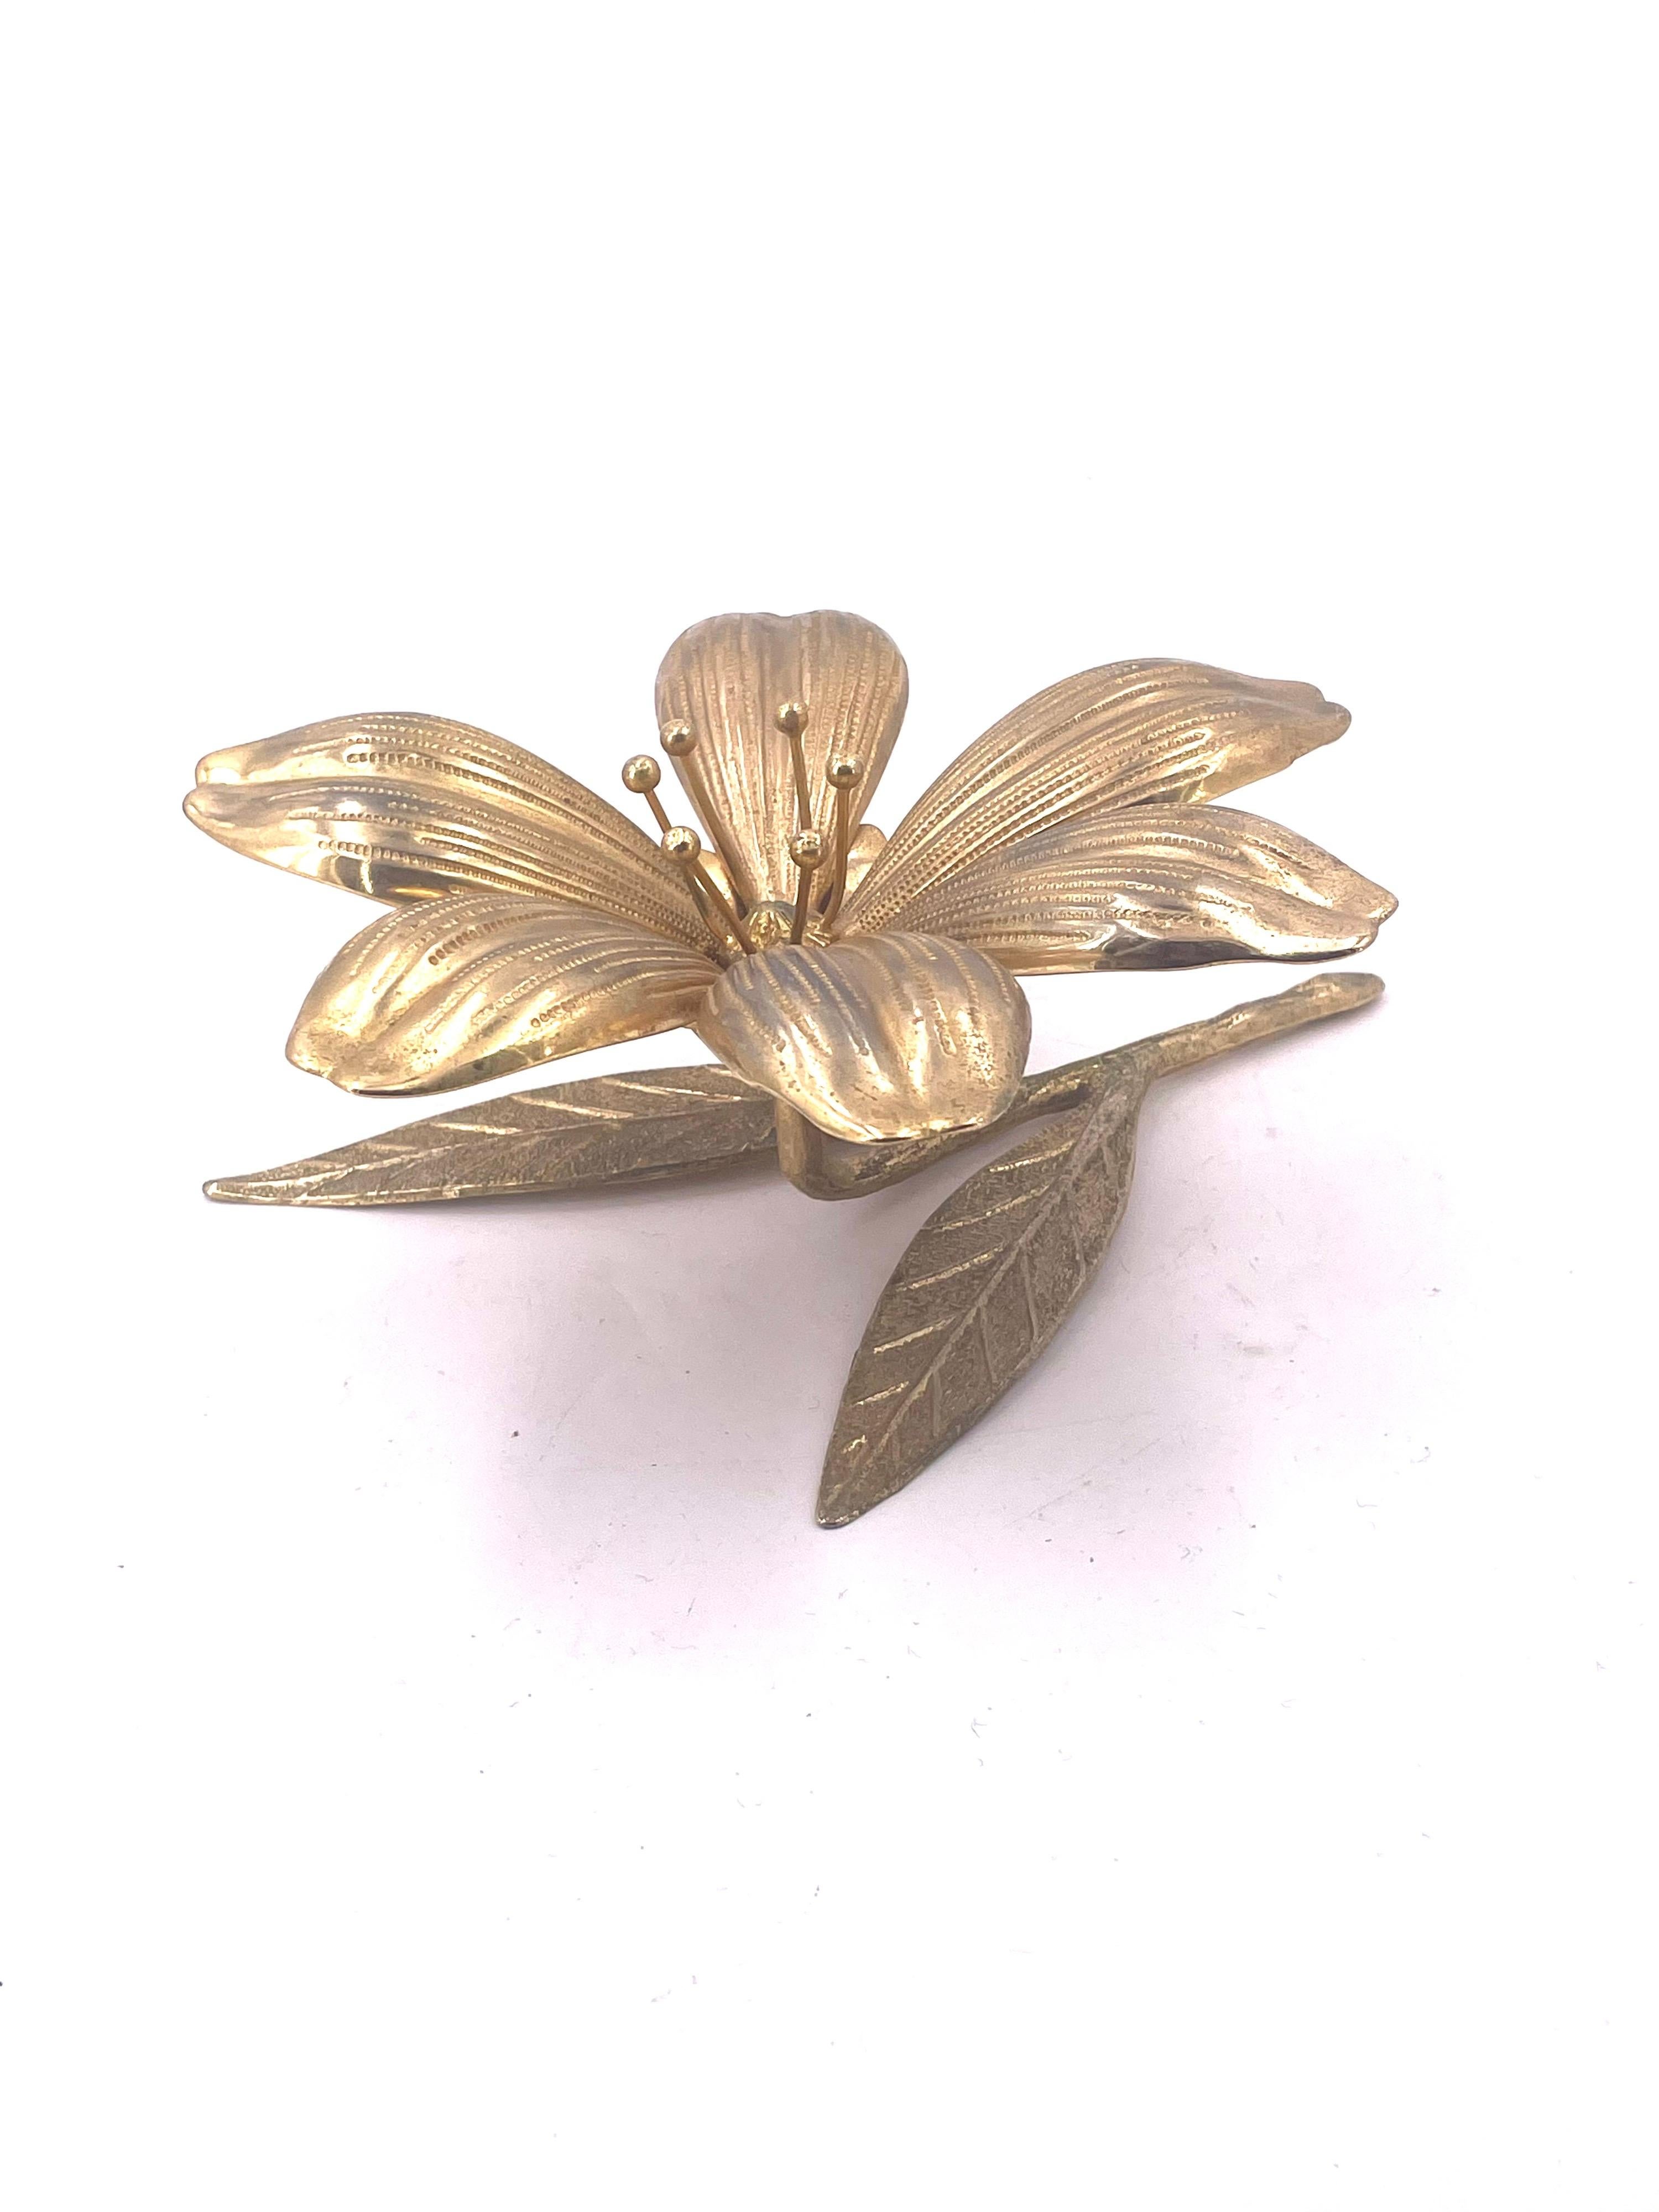 Beautiful and rare lotus polished brass 6 leaf ashtray, each leaf comes apart and becomes a portable ashtray, we polished and cleaned this piece.